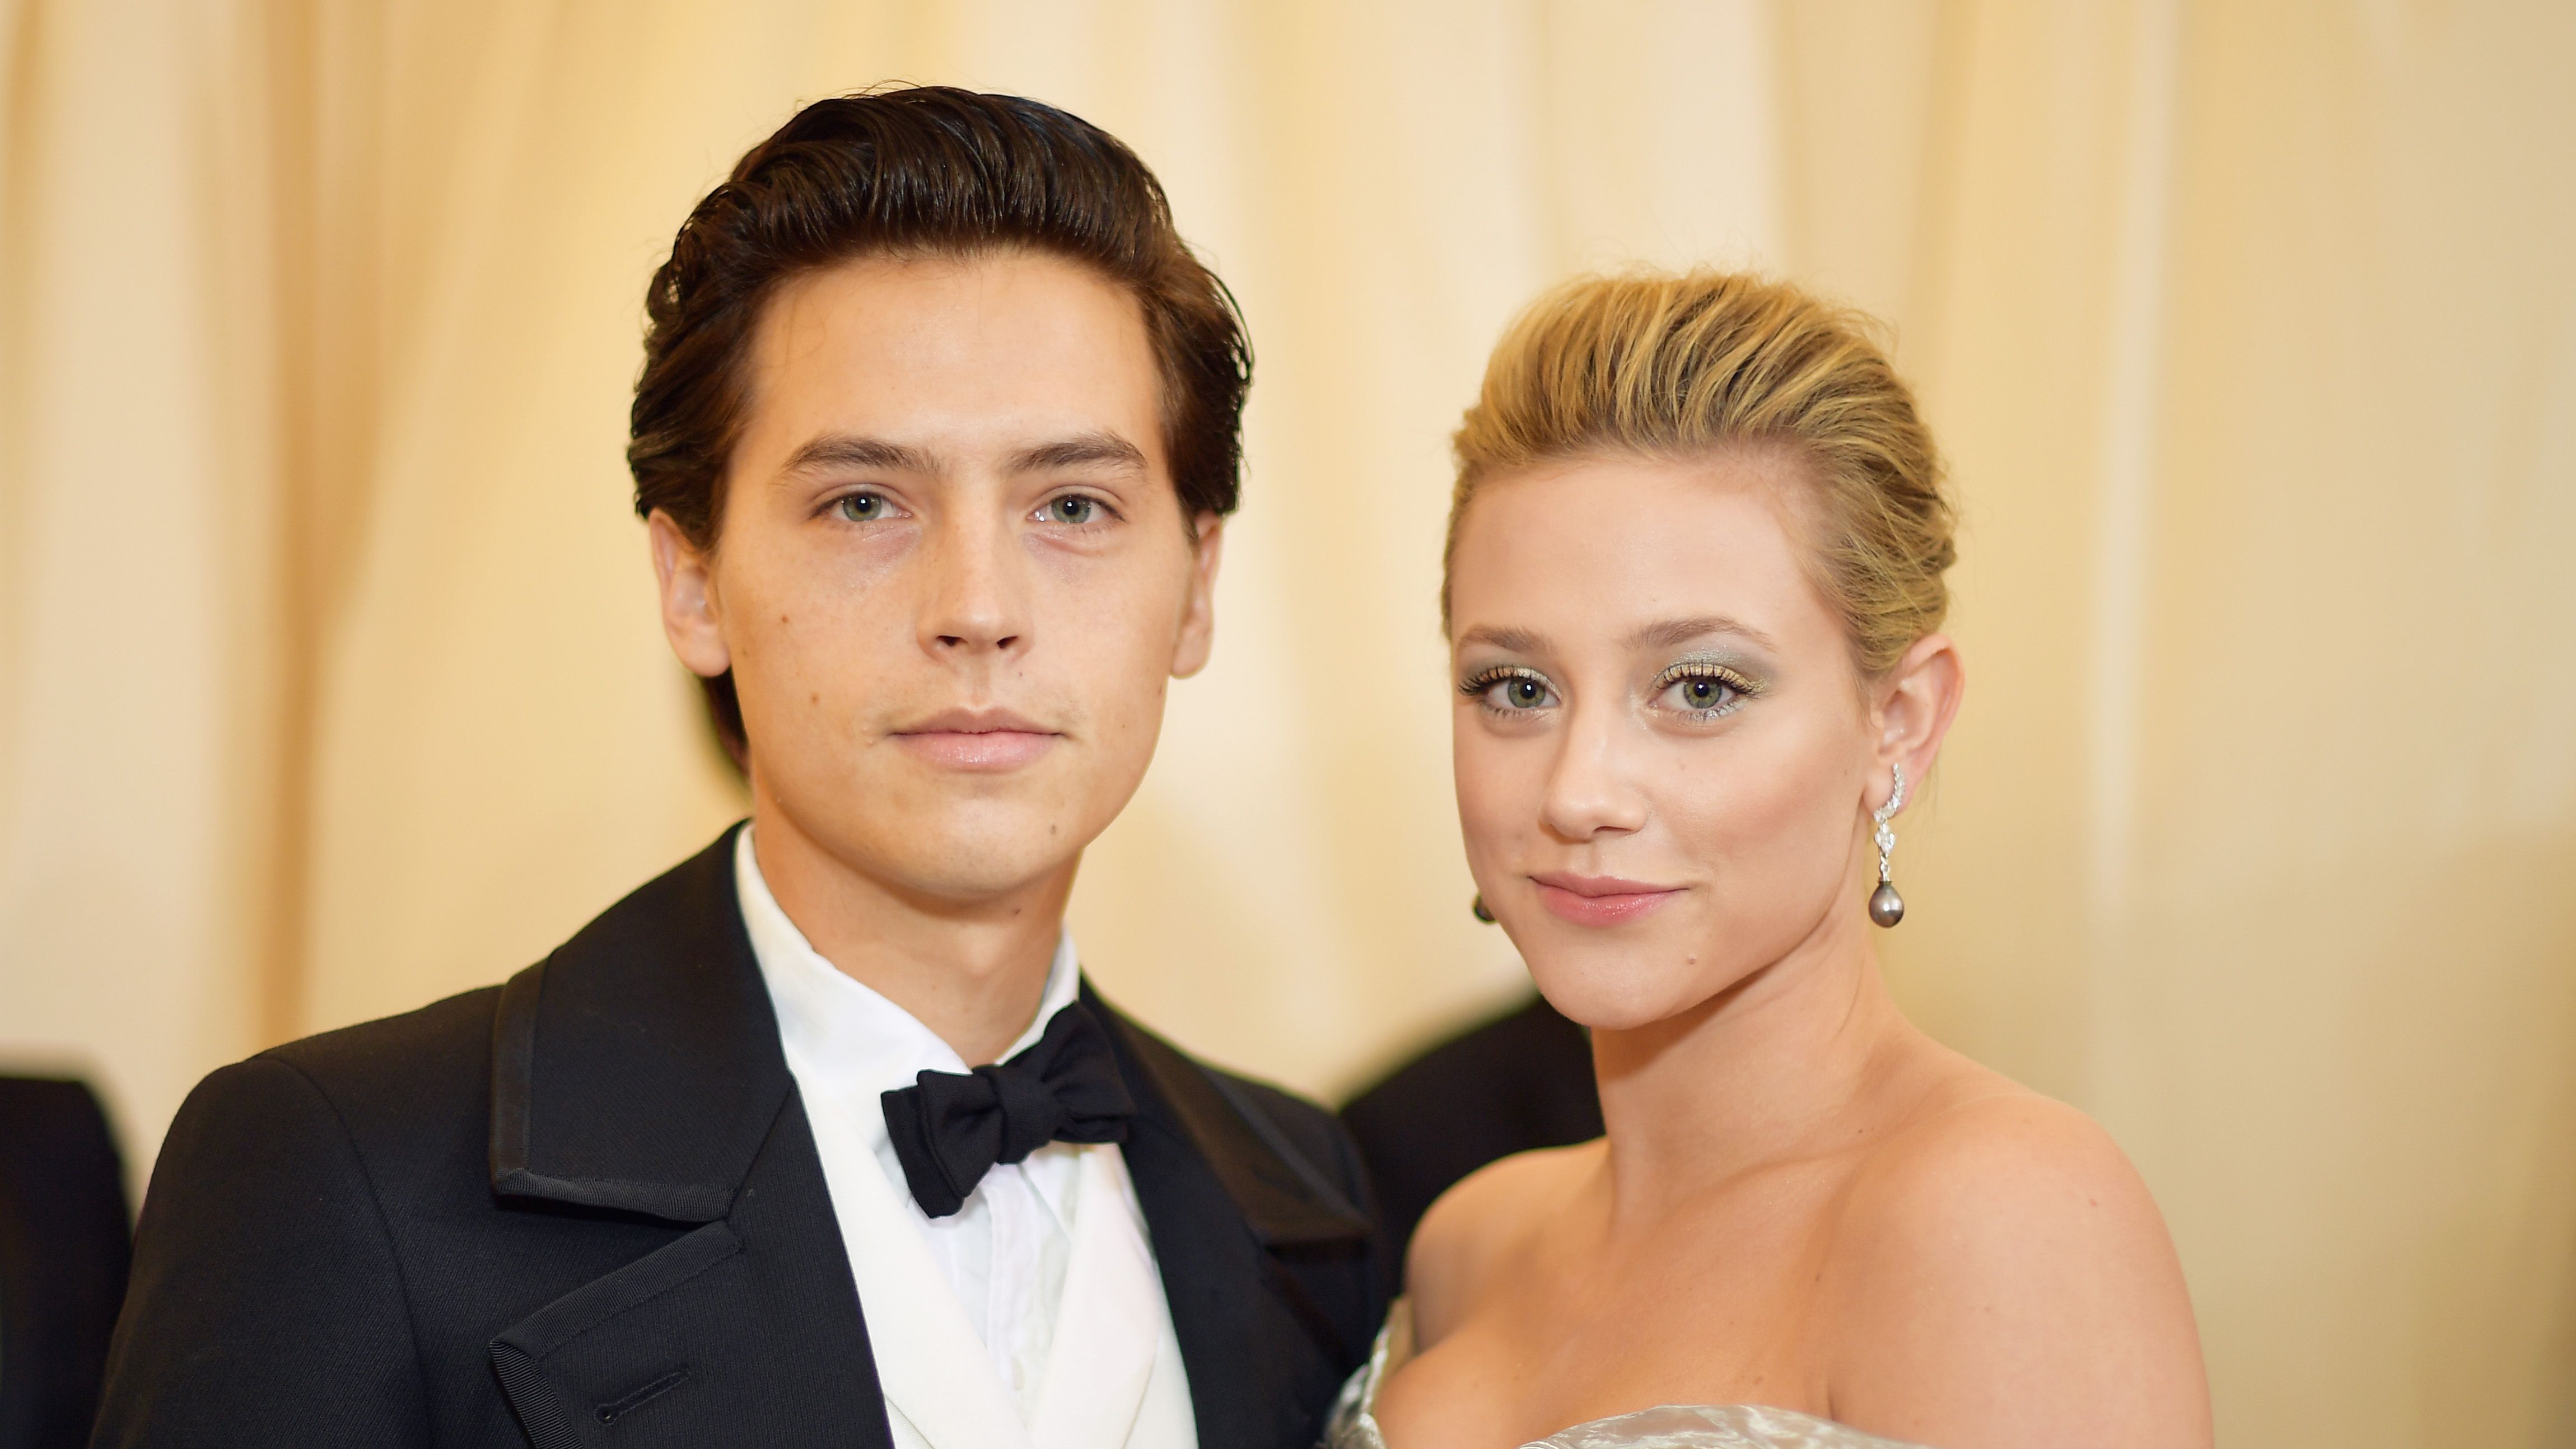 Lili Reinhart And Cole Sprouse Finally Make Couple Debut At Met